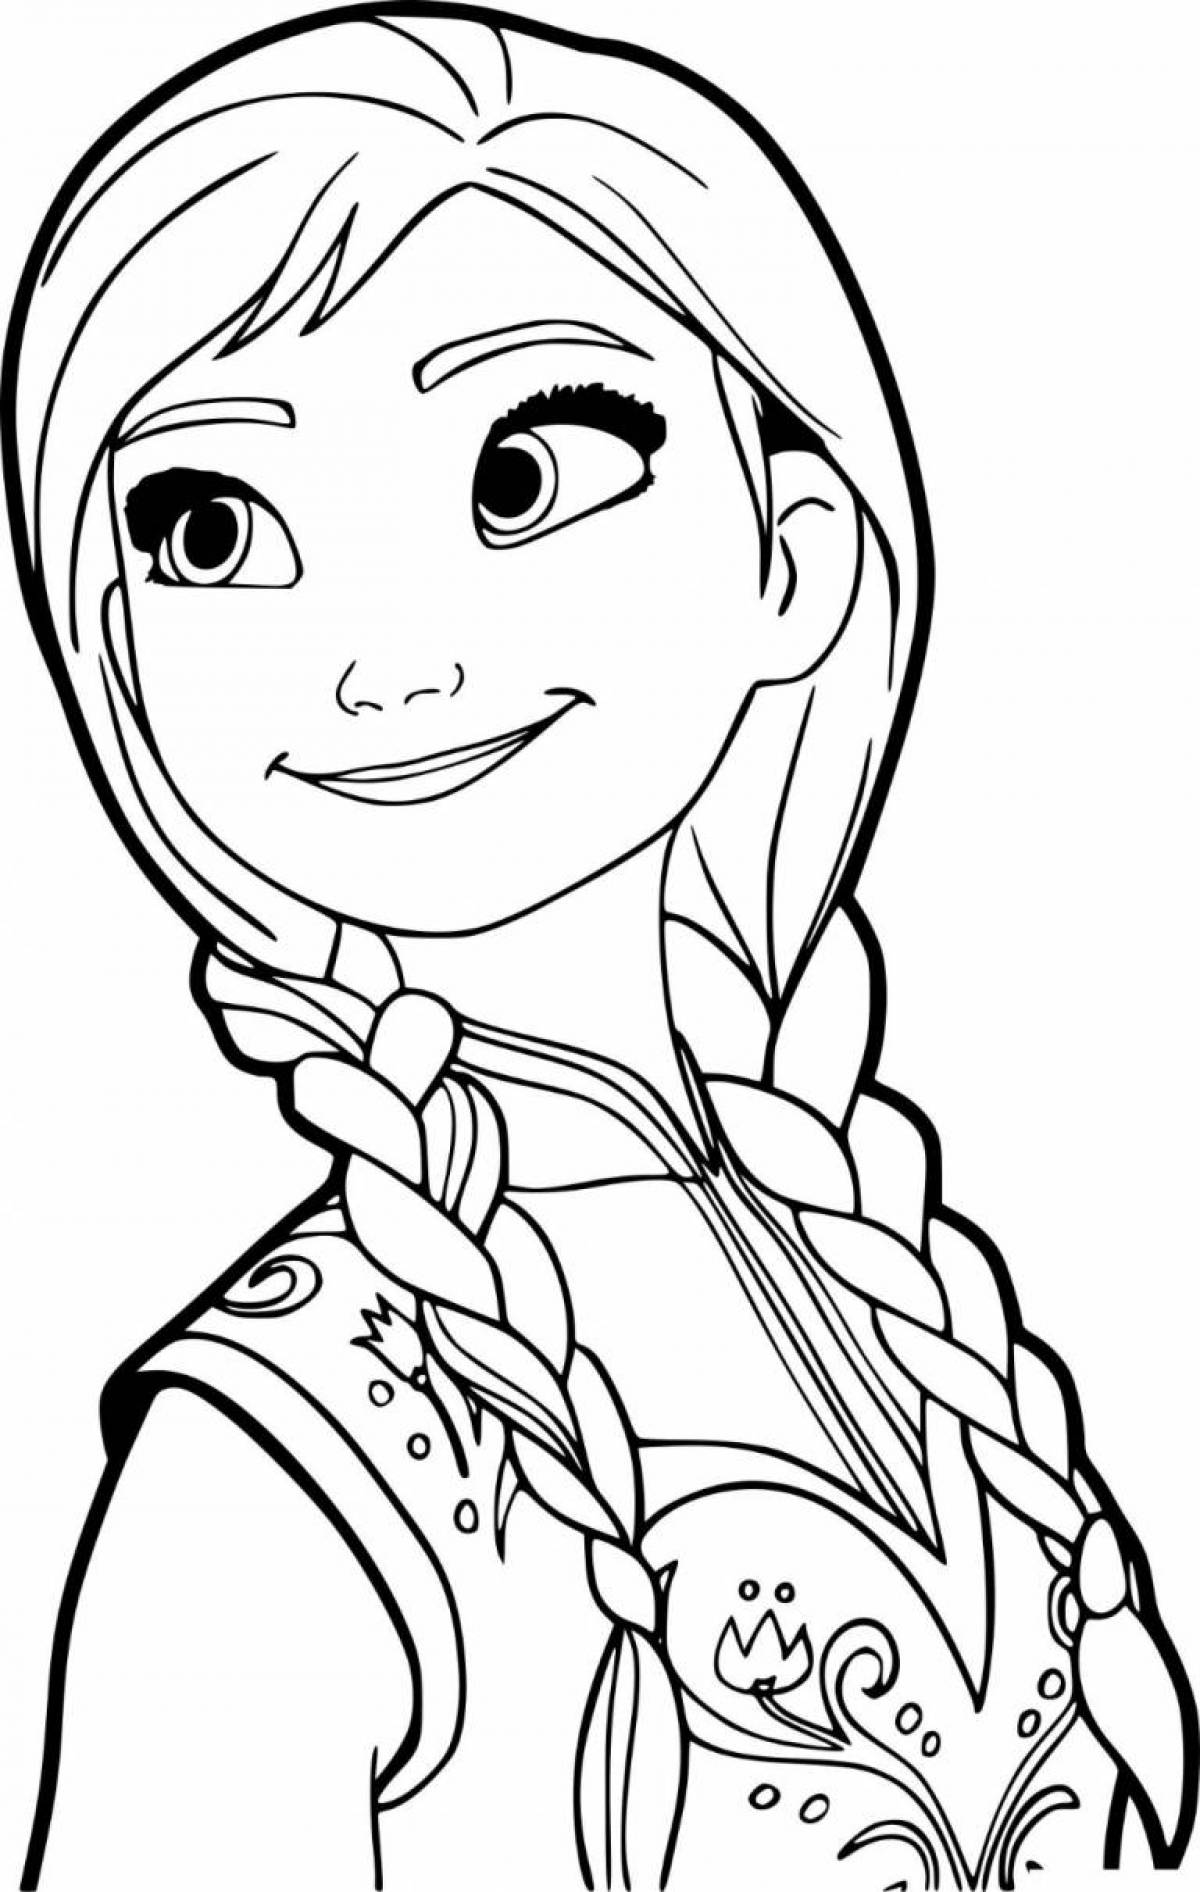 Coloring page dazzling poppy